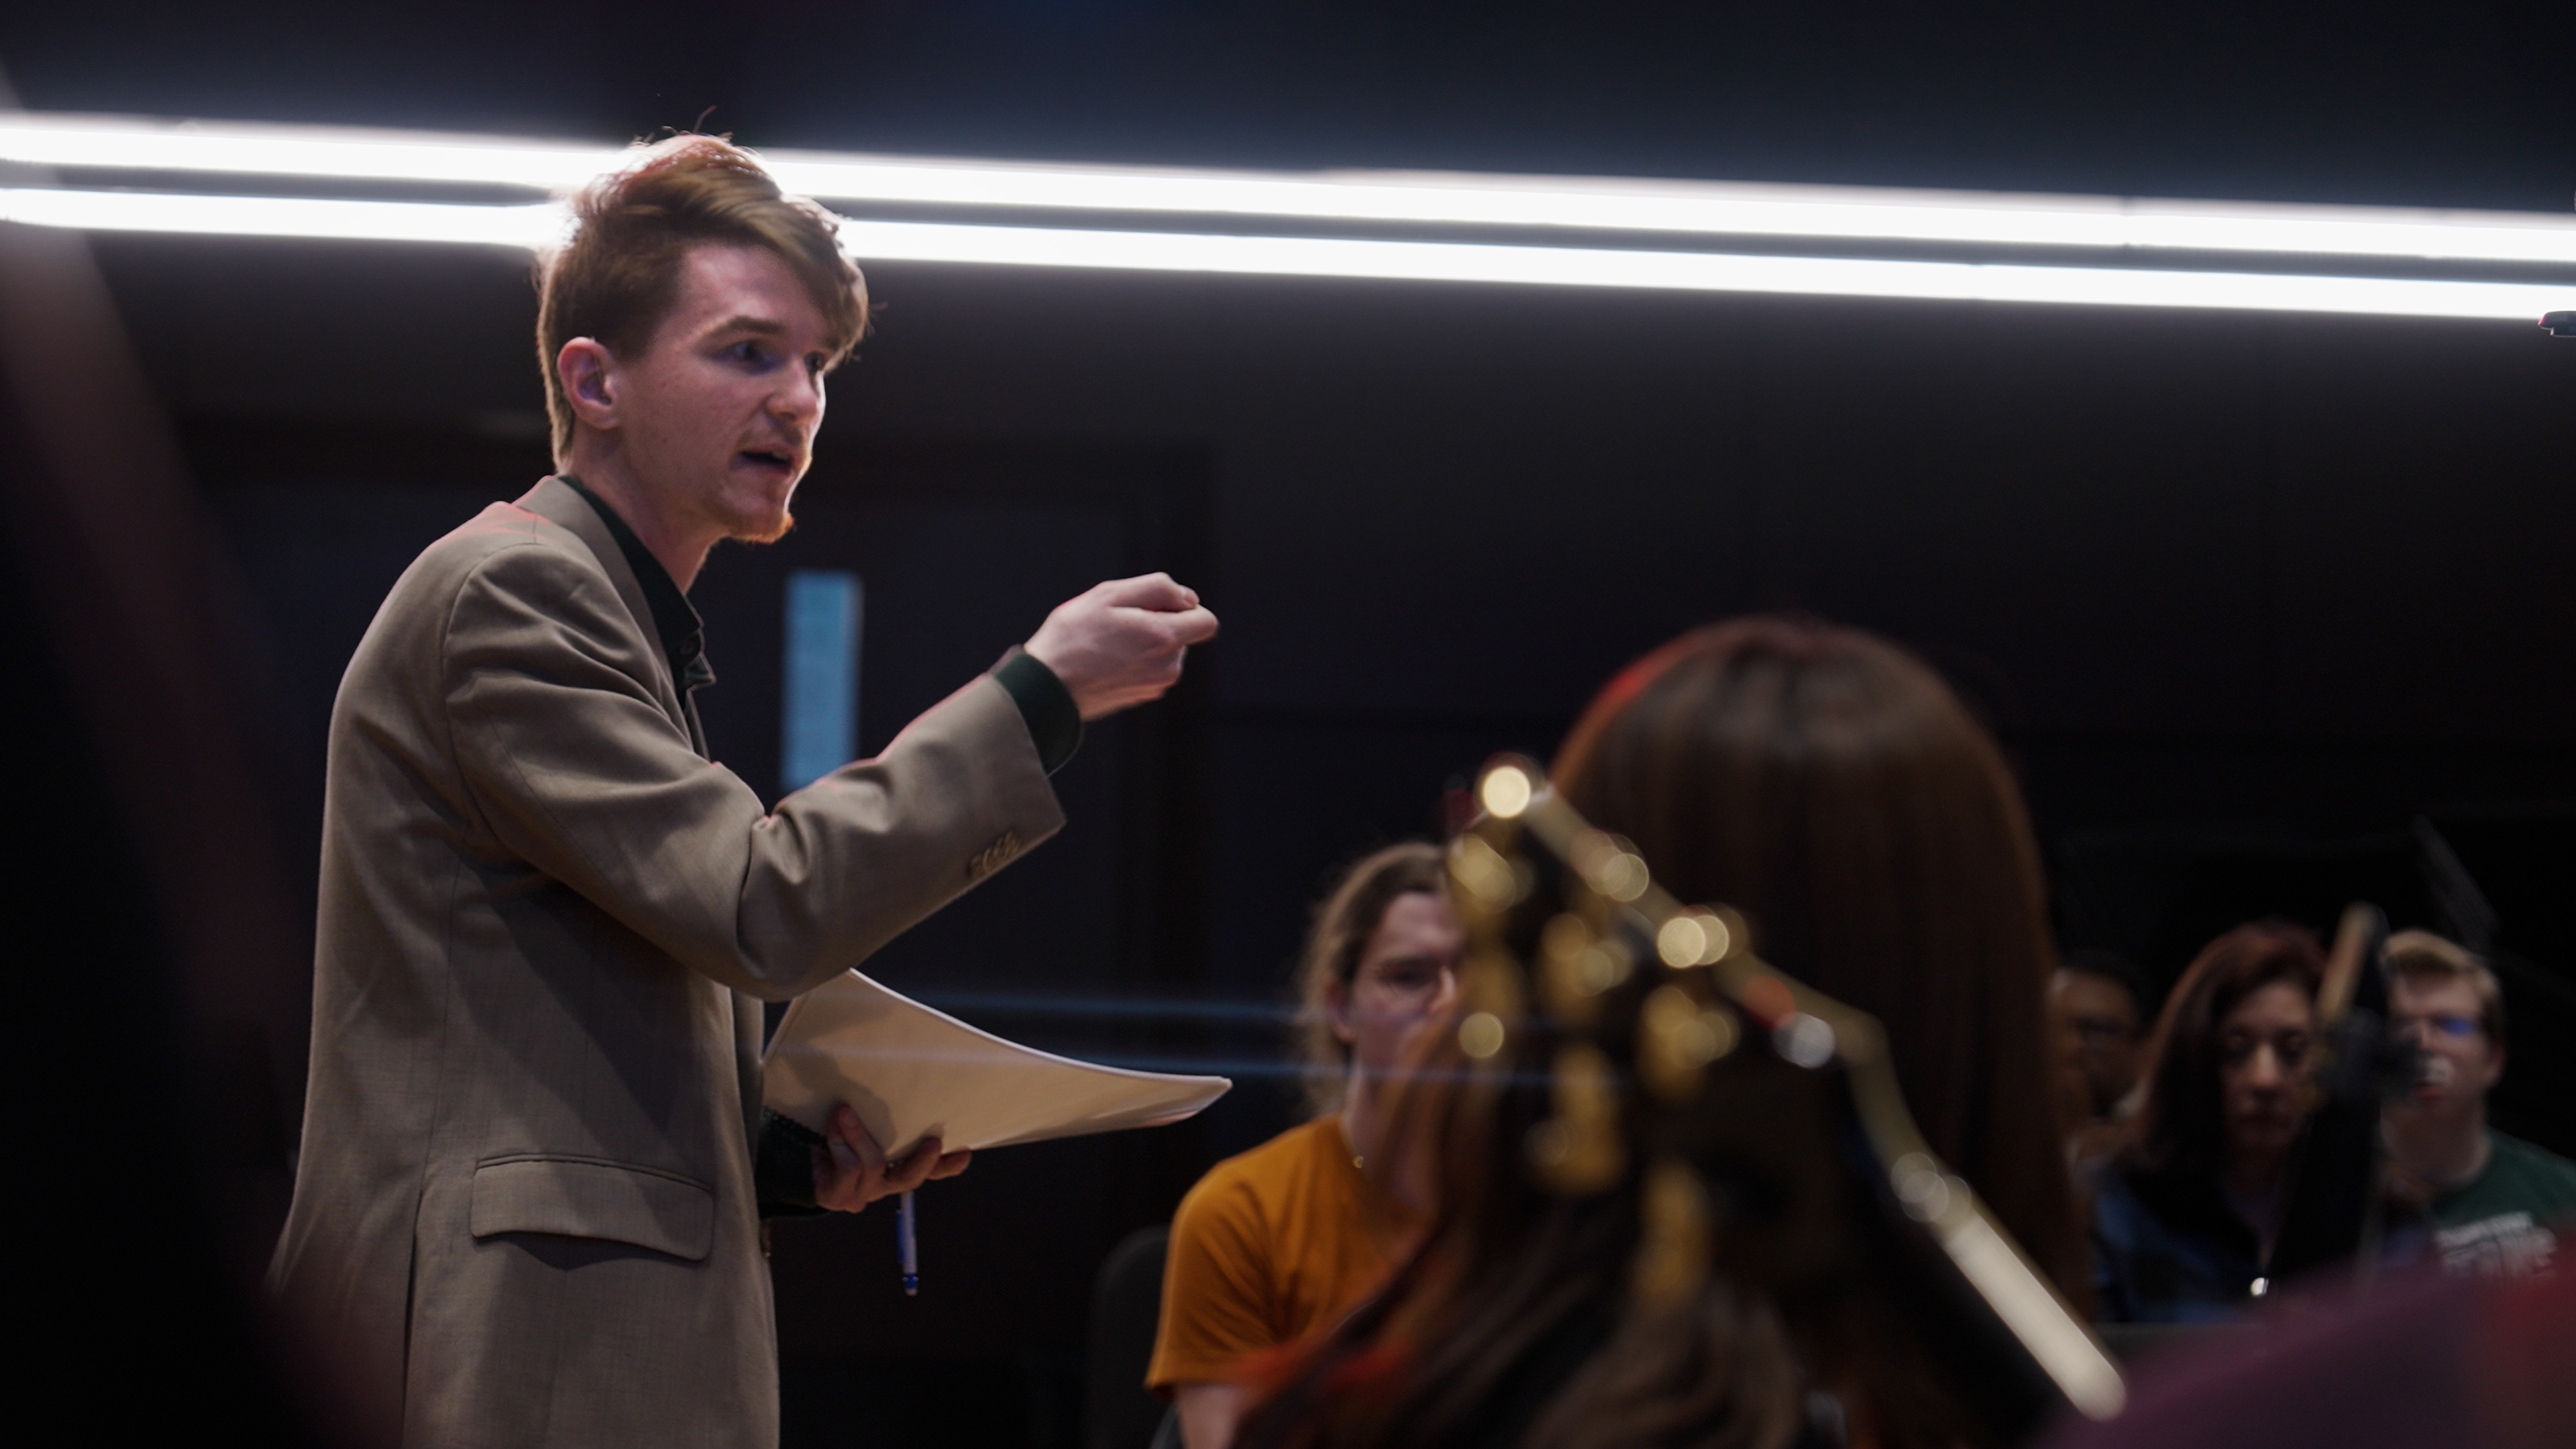 DMA student Tyler Mazone, wearing a grey suit jacket, raises his hand to conduct student musicians.